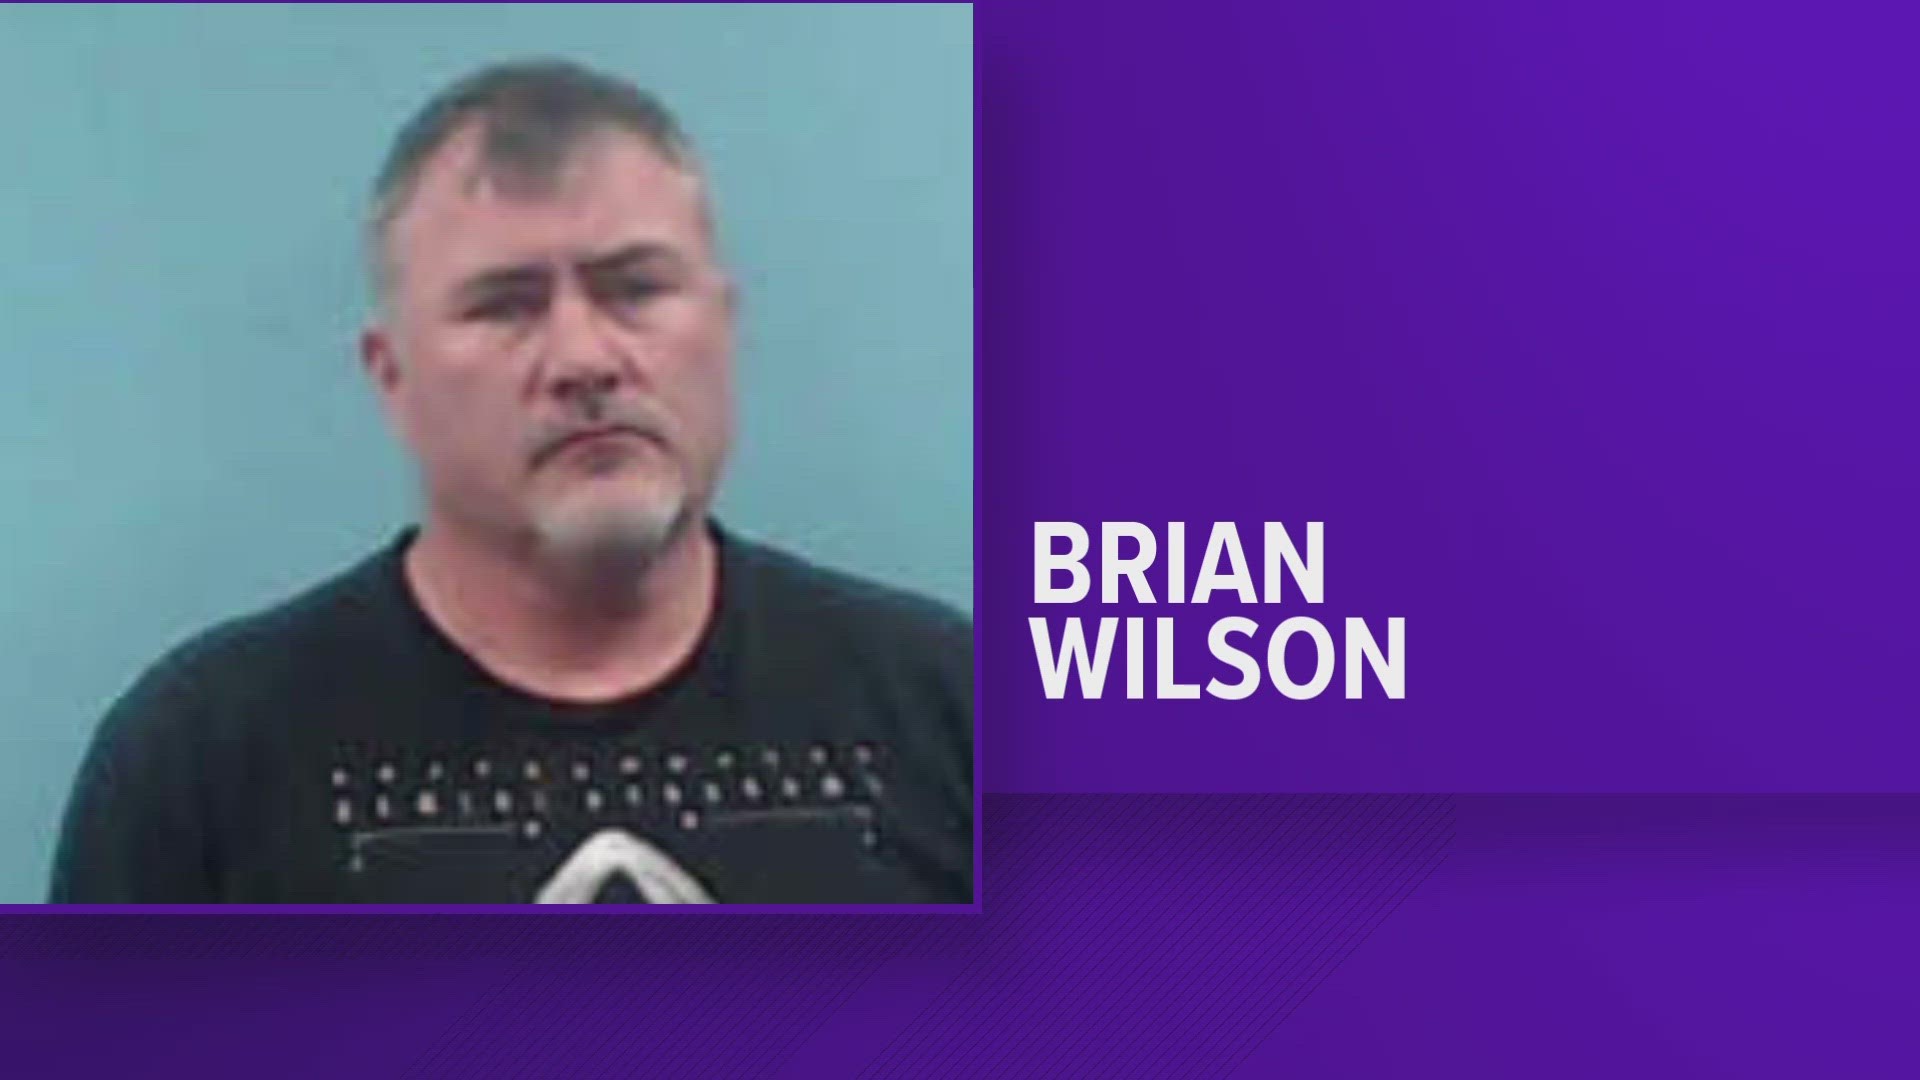 Brian Wilson bonded out of jail on trespassing charges early Thursday before the sheriff said he shot two women and a man.